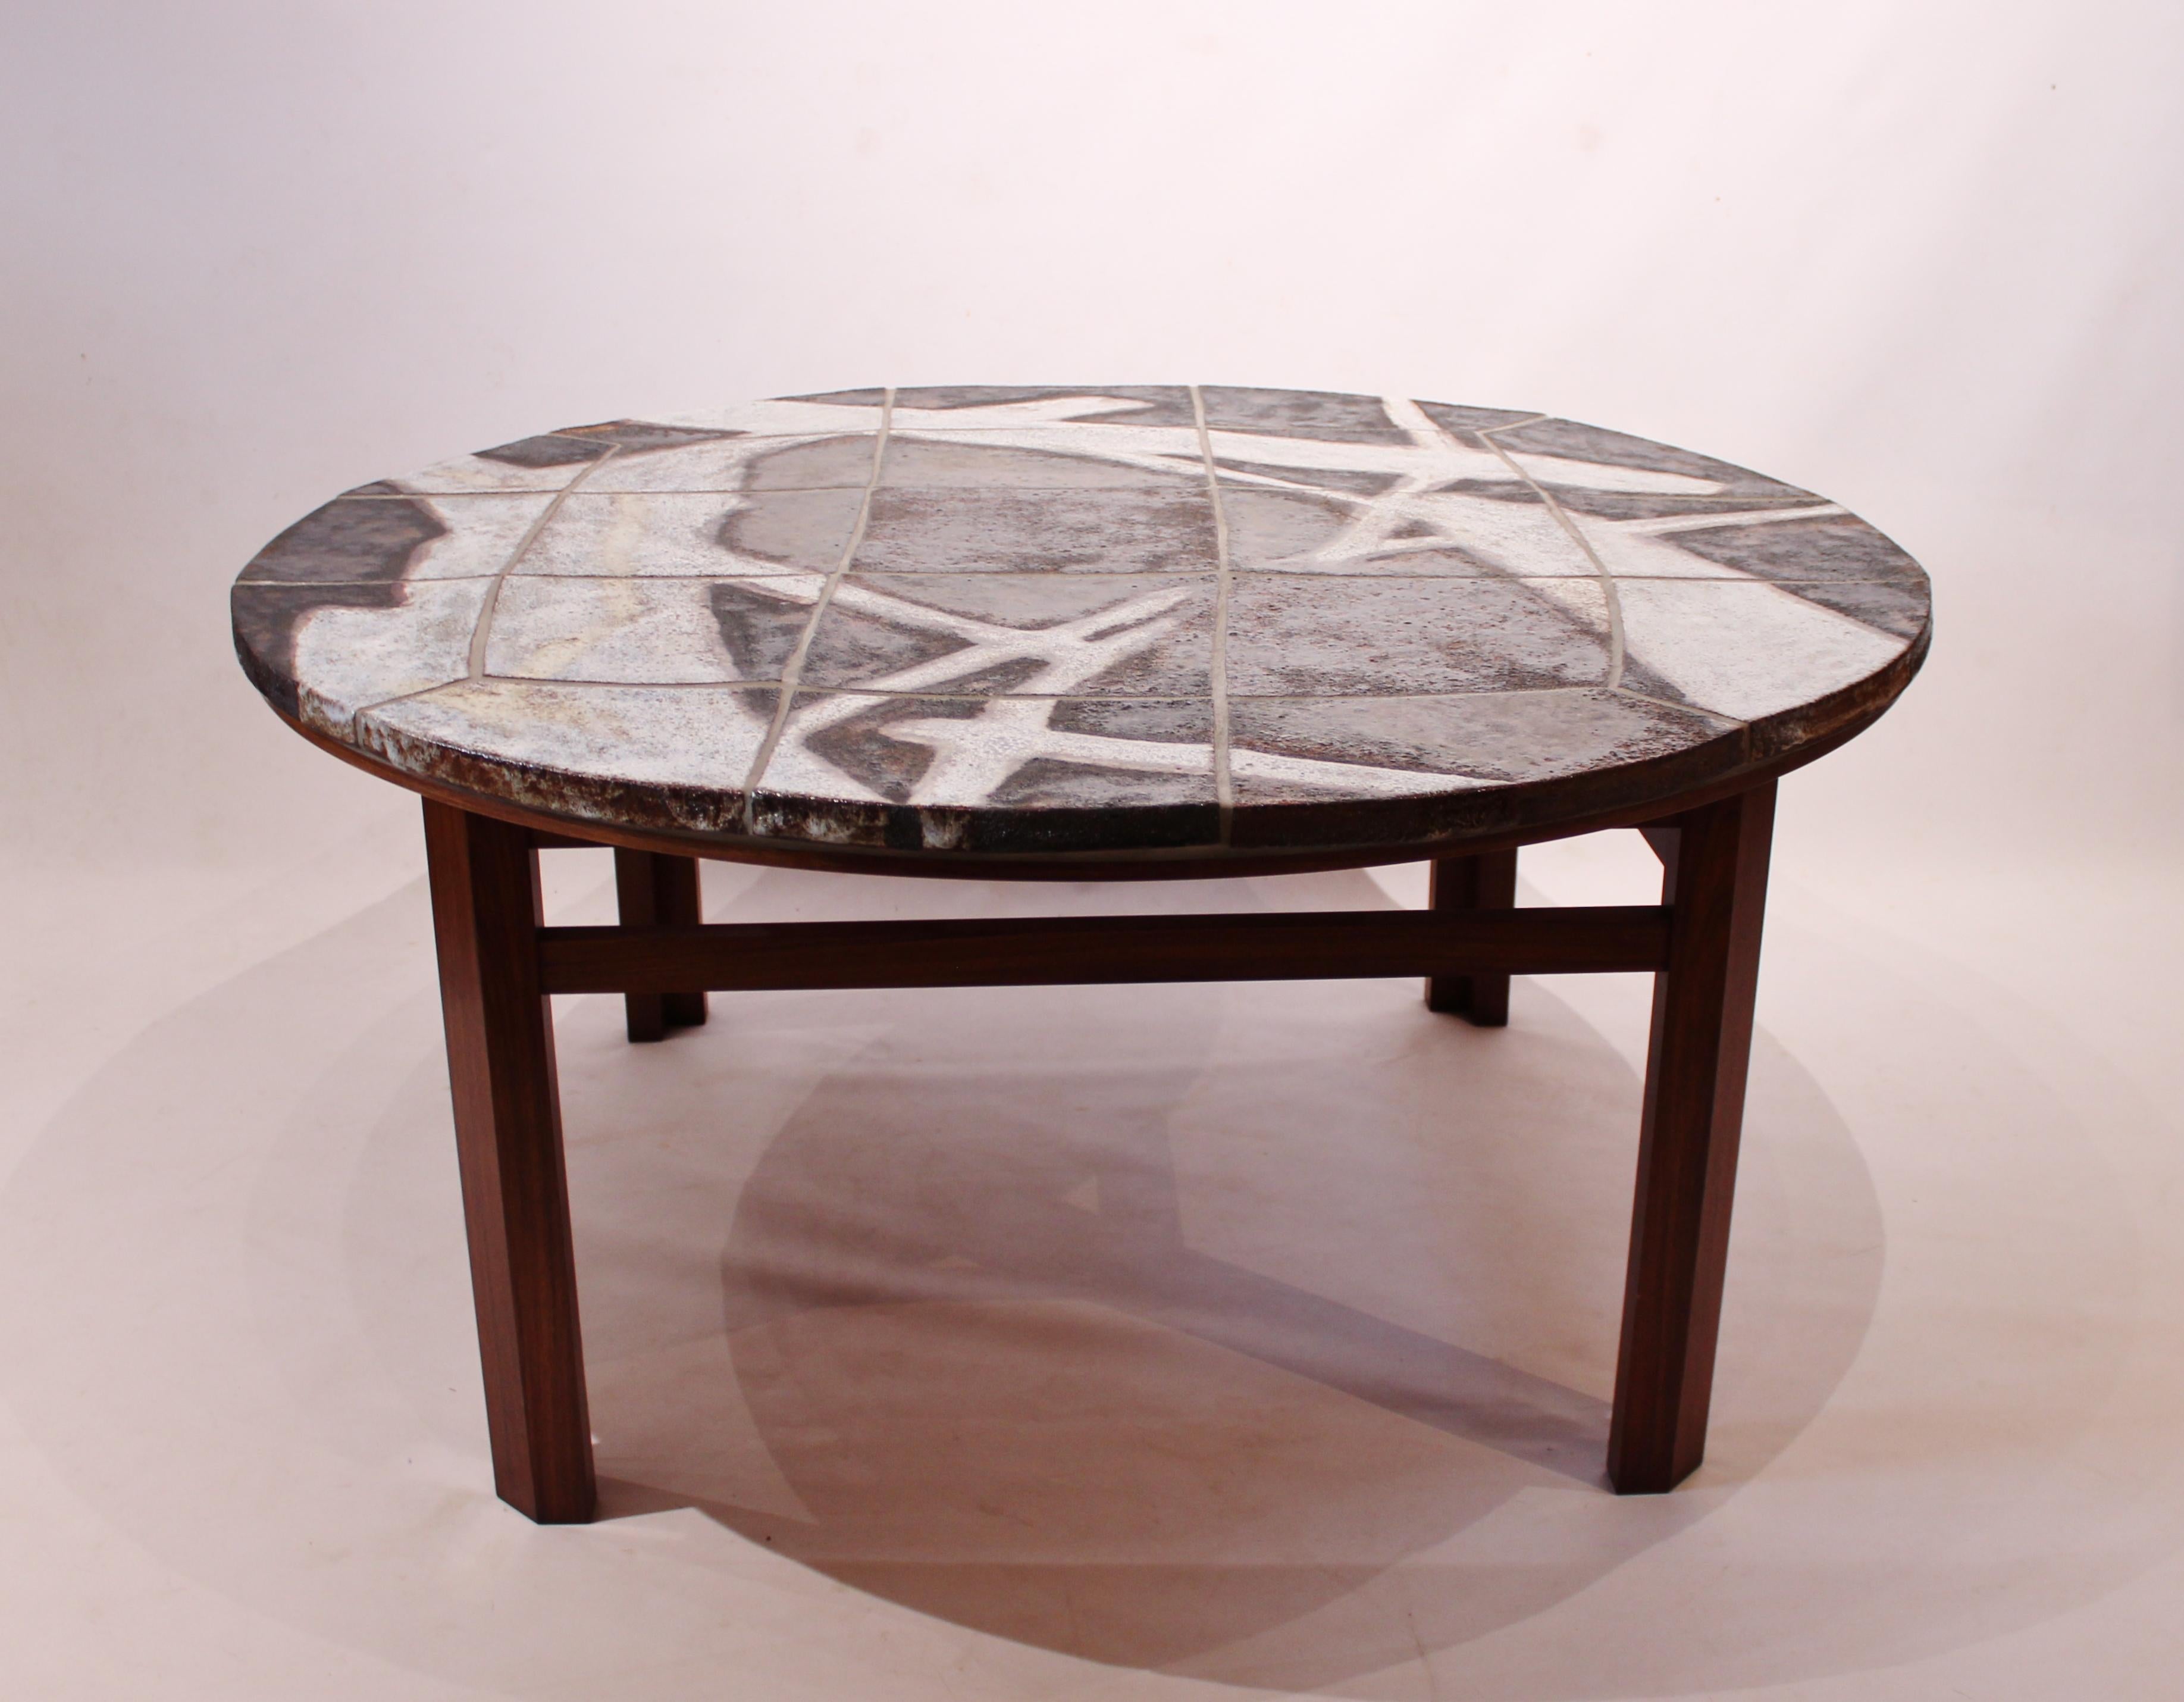 Large round coffee table with stone plate and frame of rosewood. The table is of Danish design from the 1960s and in great vintage condition.